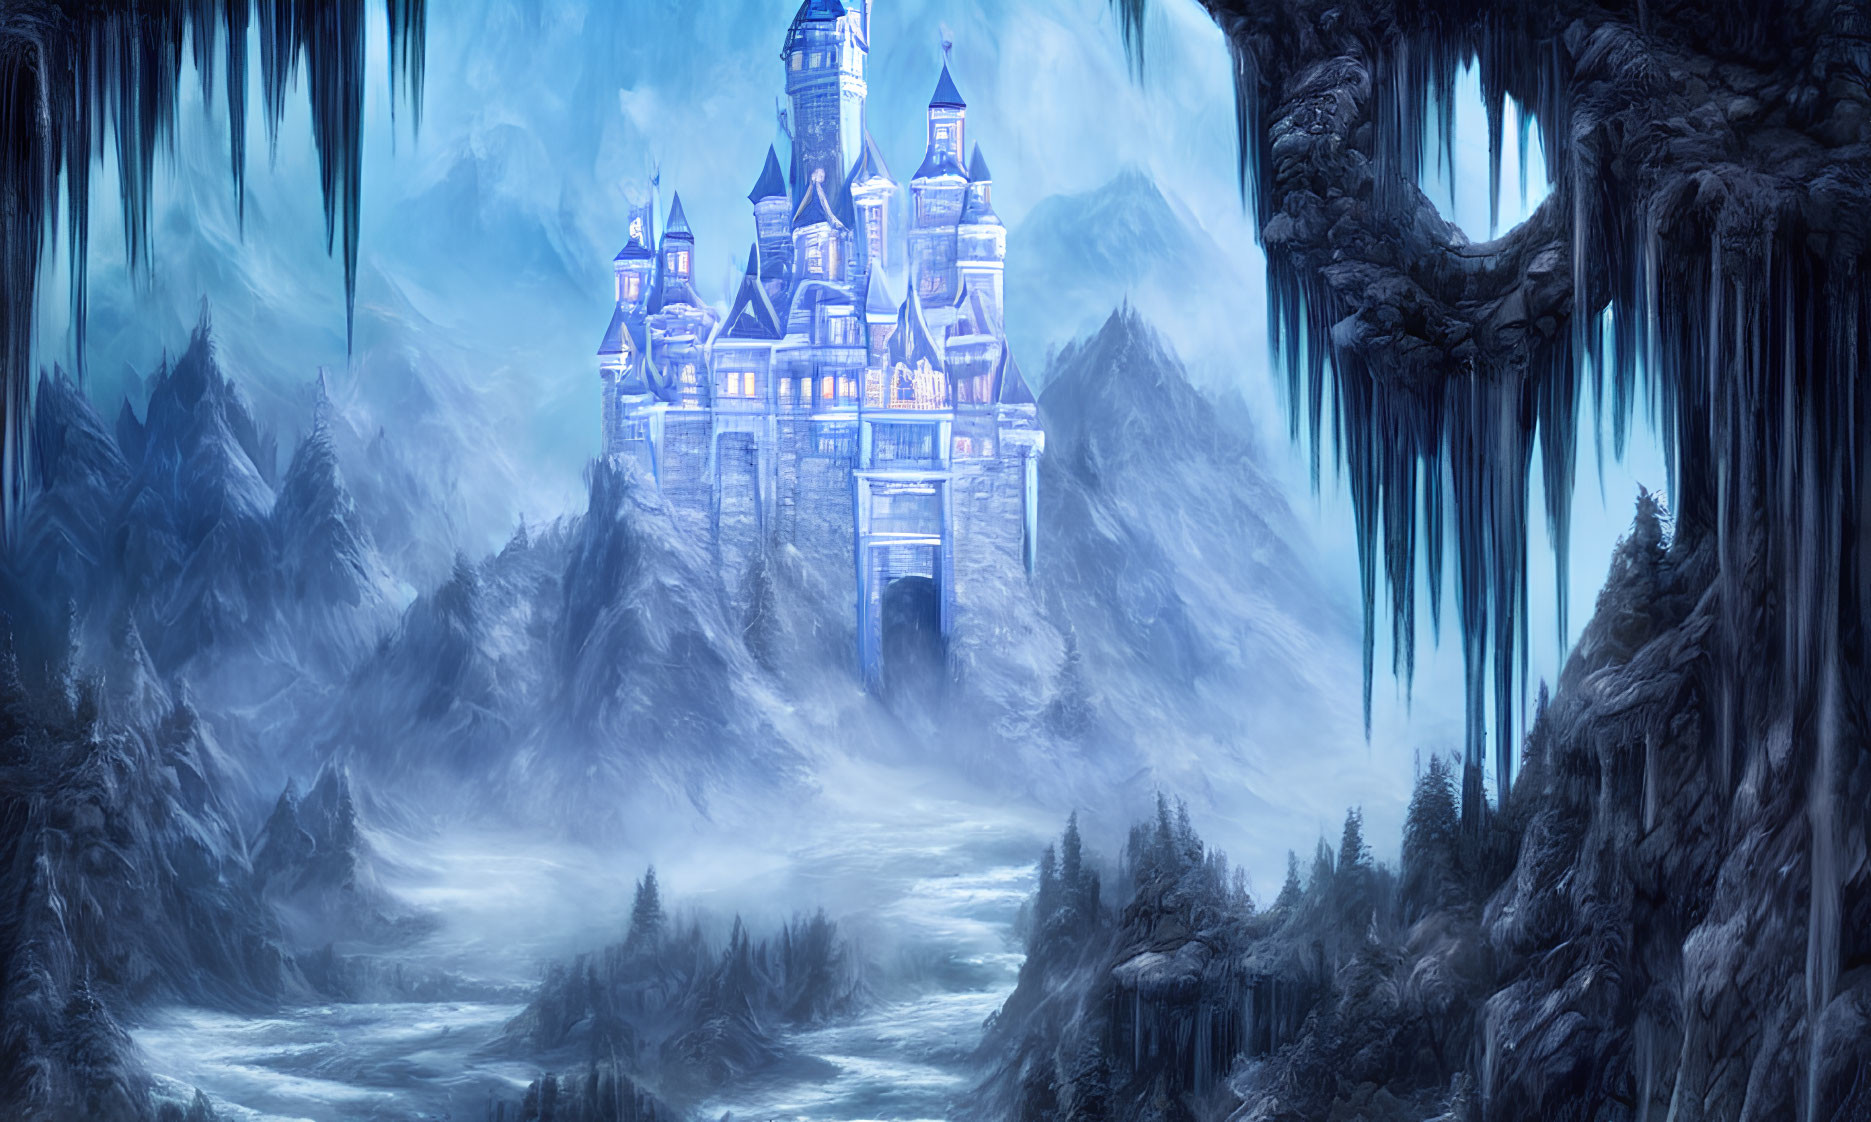 Mystical castle on rugged mountains in icy landscape